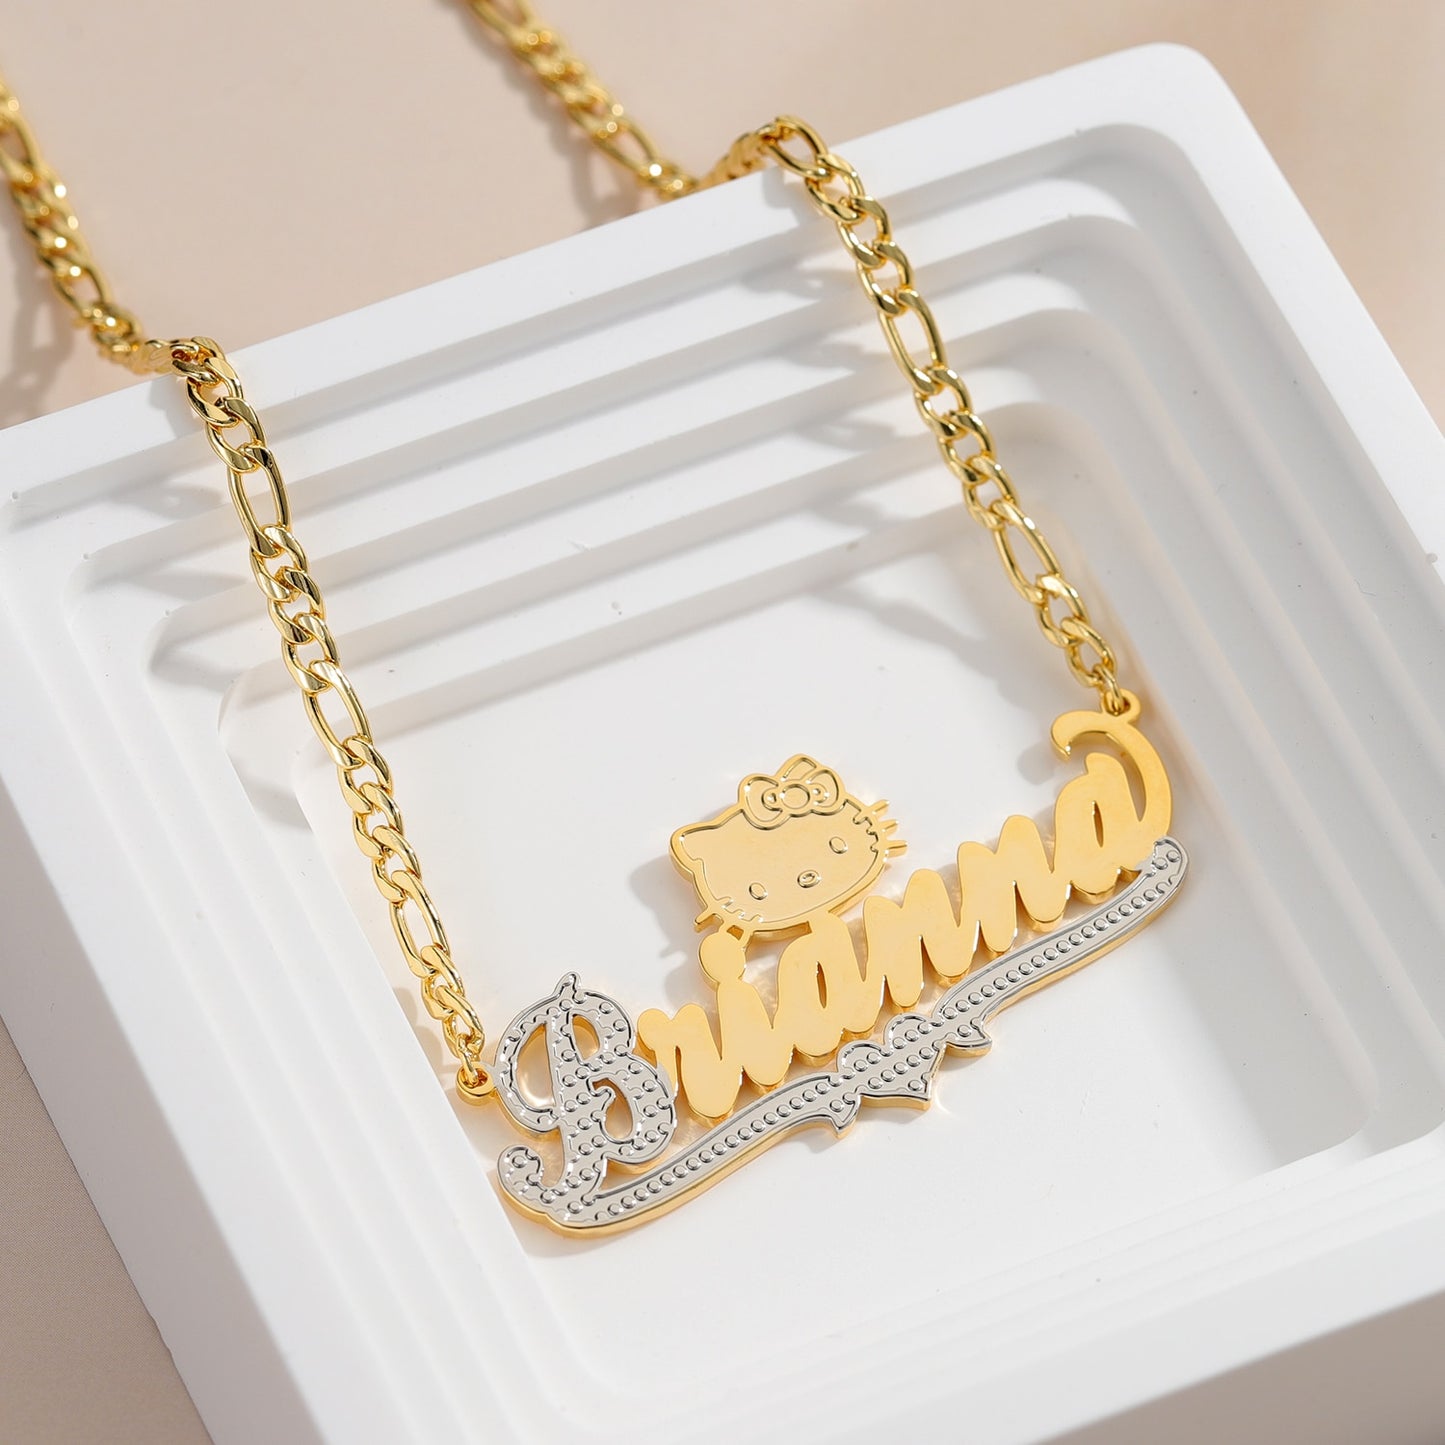 Custom Name Jewelry 18K Plated Two Tone Gold Pendant Personalized Double Plate Name Necklace Customized Stainless Steel Jewelry